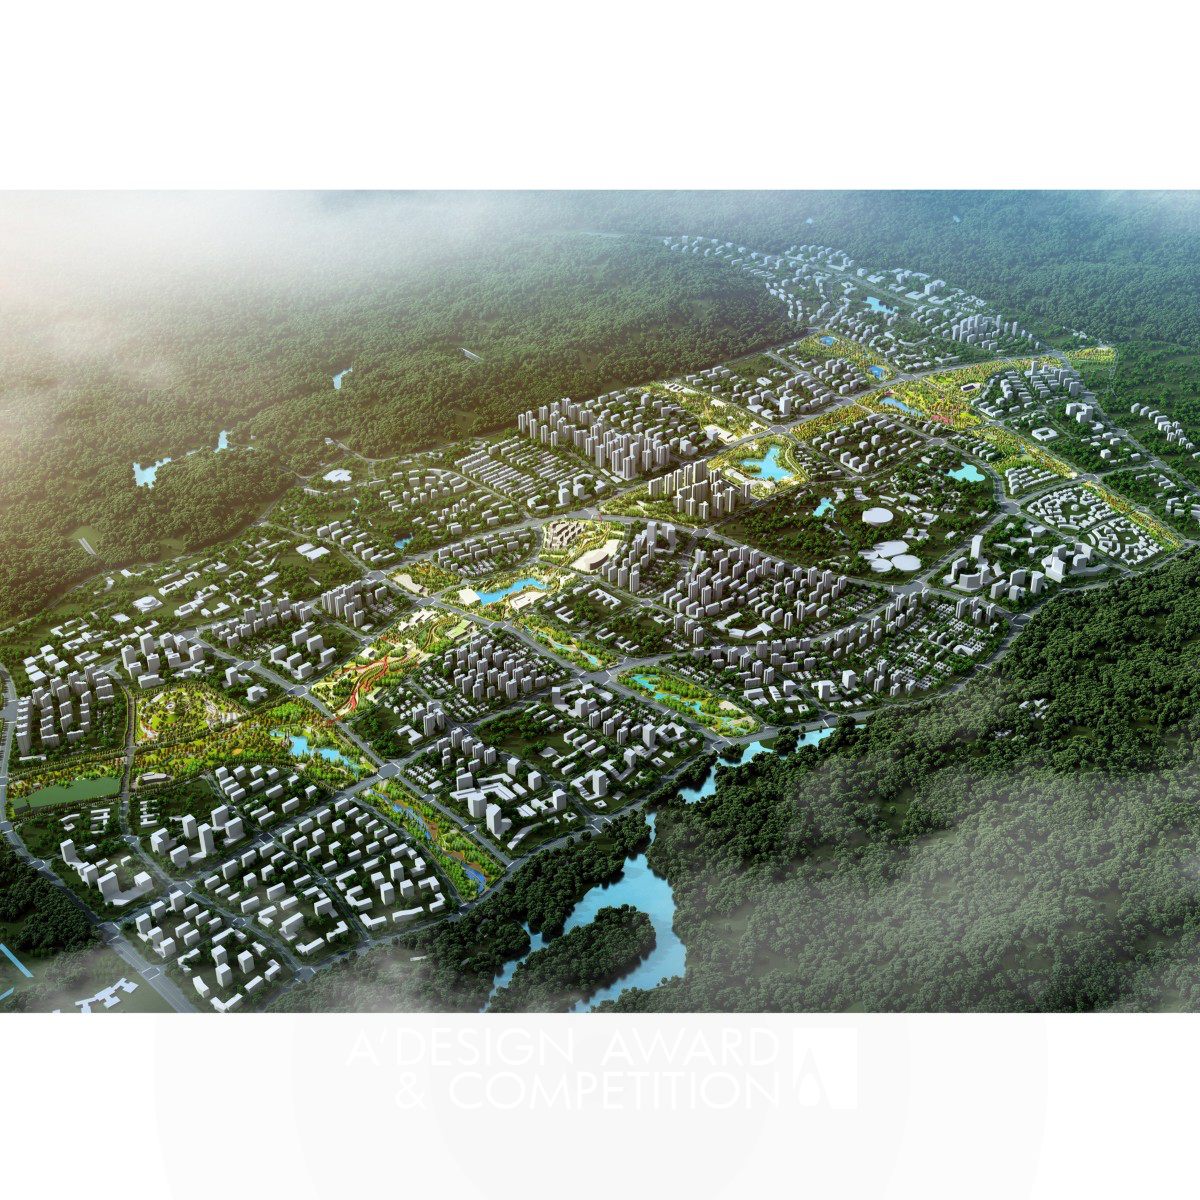 JWP Design wins Bronze at the prestigious A' Landscape Planning and Garden Design Award with Taiping New City Poetic Emerald Corridor Landscape Planning Design.